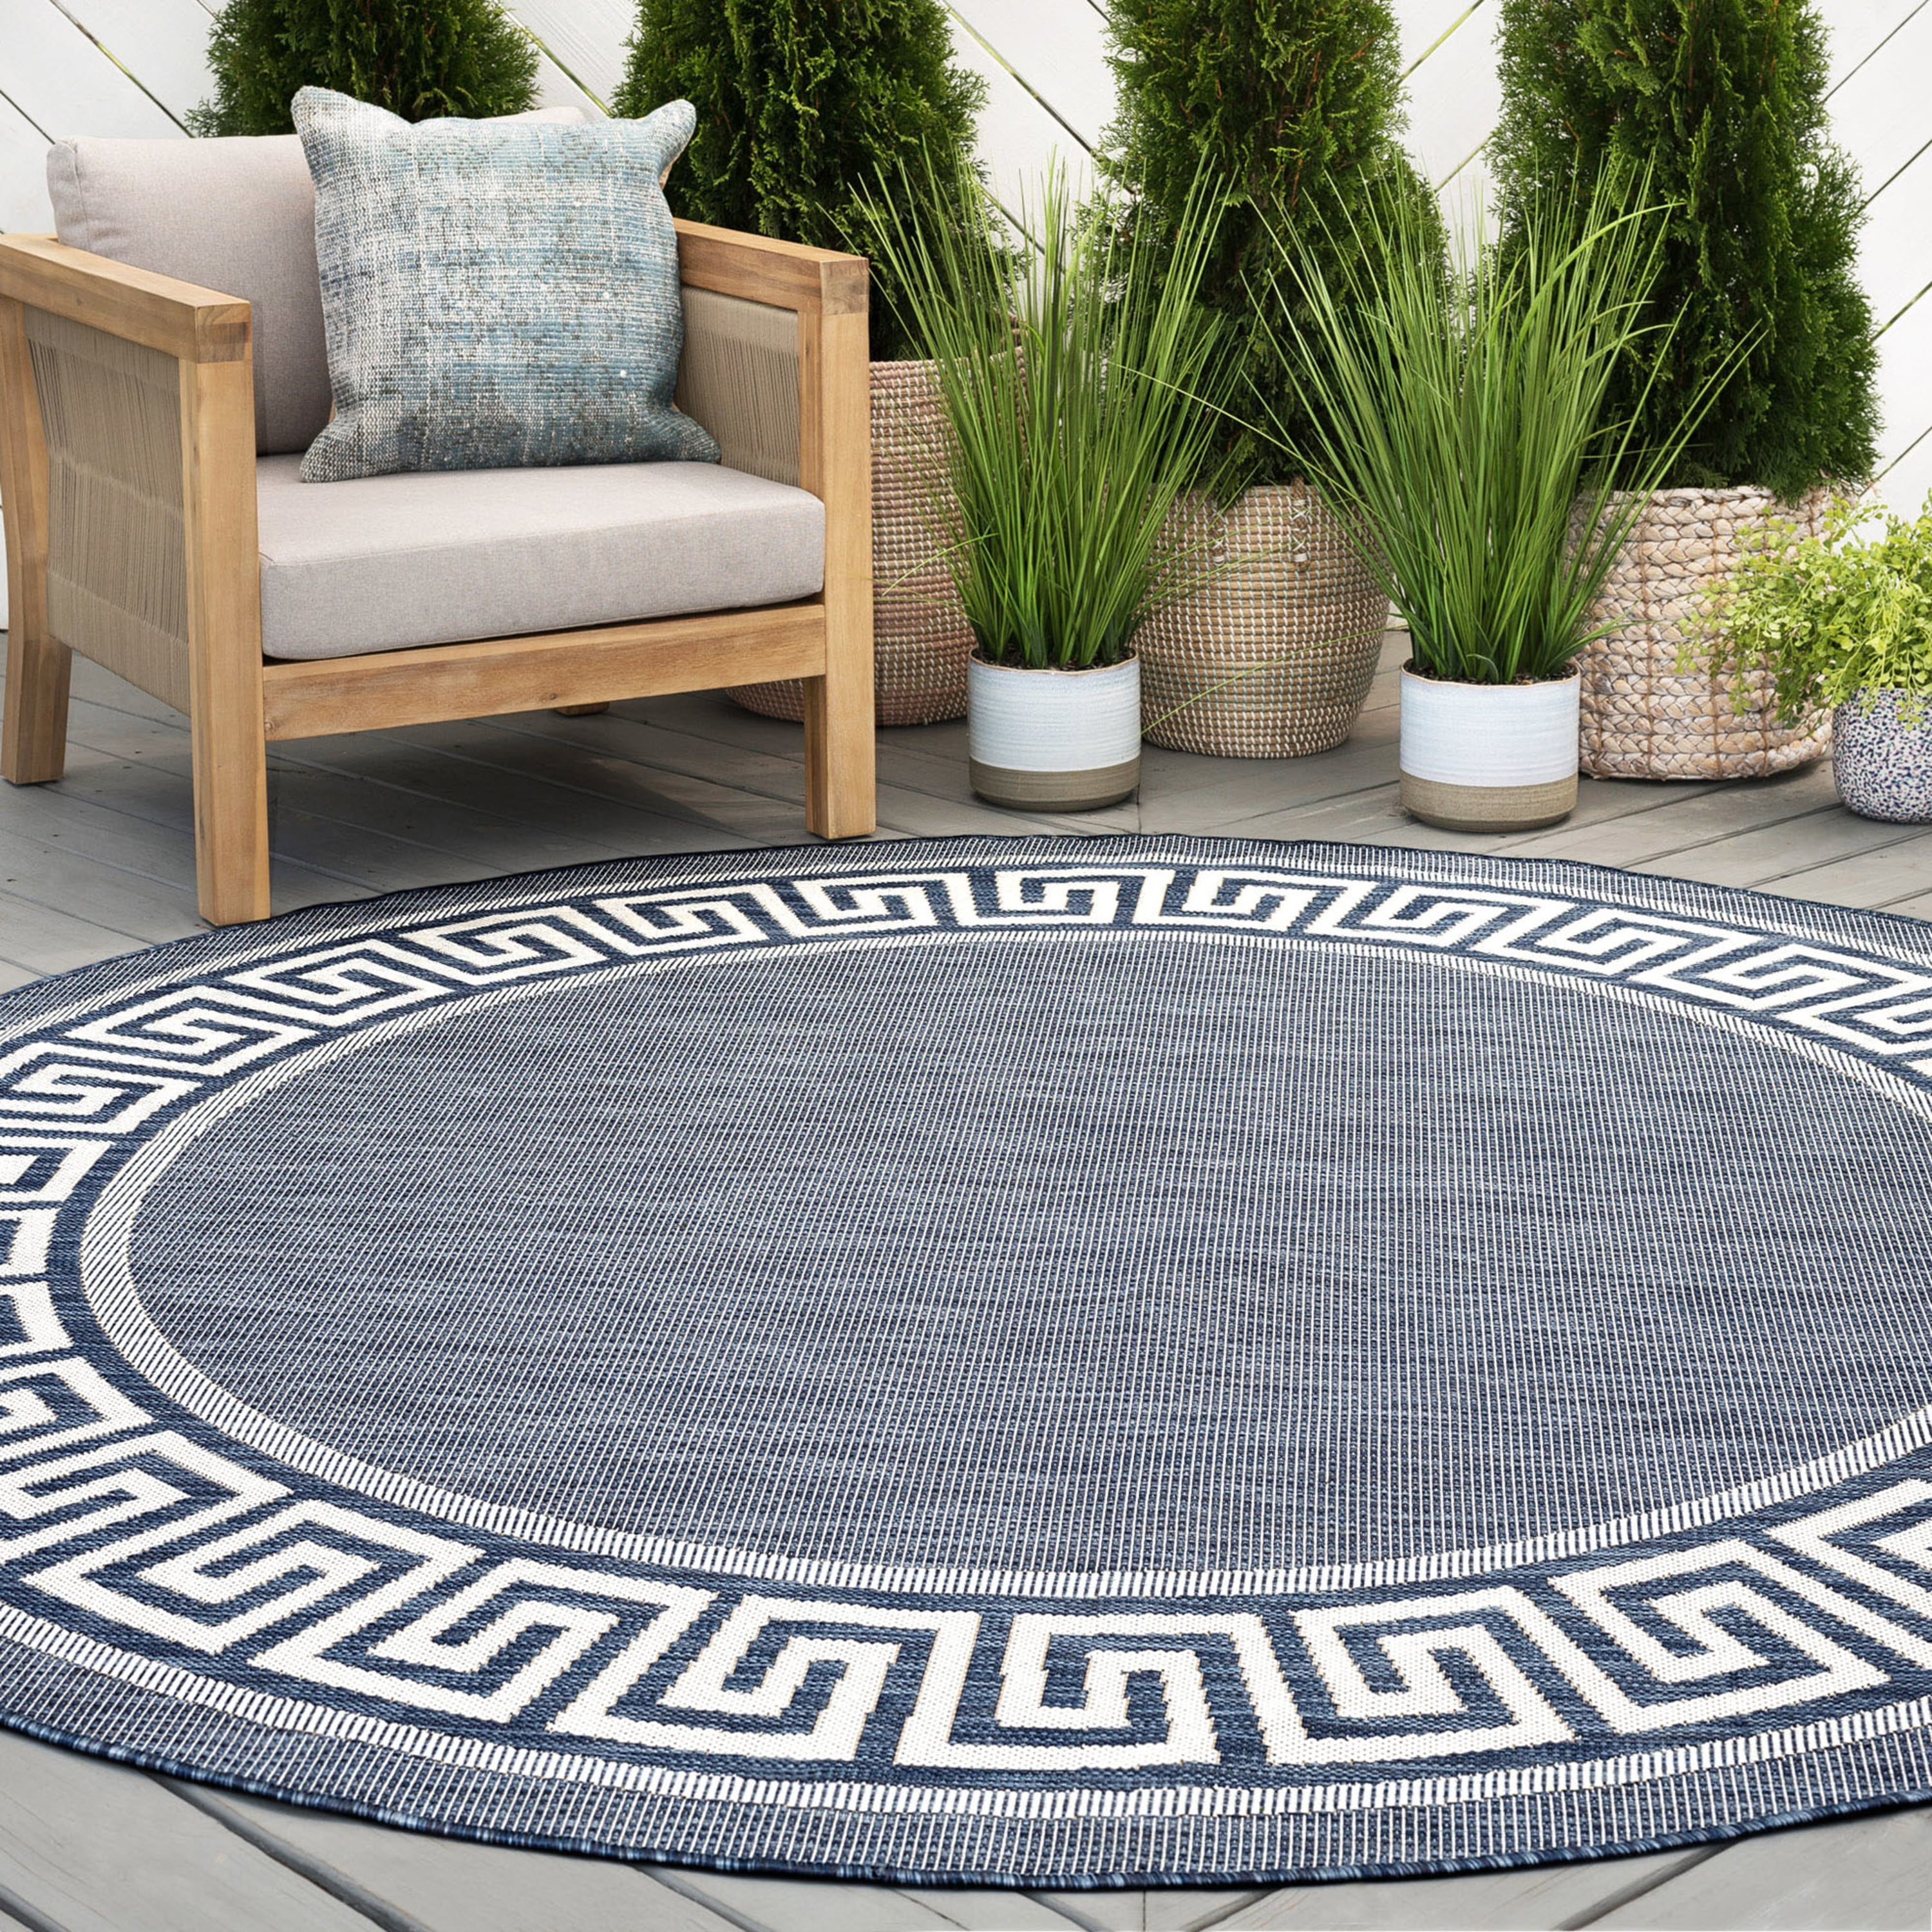 2x8 Water Resistant, Indoor Outdoor Runner Rugs for Patios, Hallway,  Entryway, Deck, Porch, Balcony or Kitchen, Outside Area Rug for Patio, Black, Greek Key